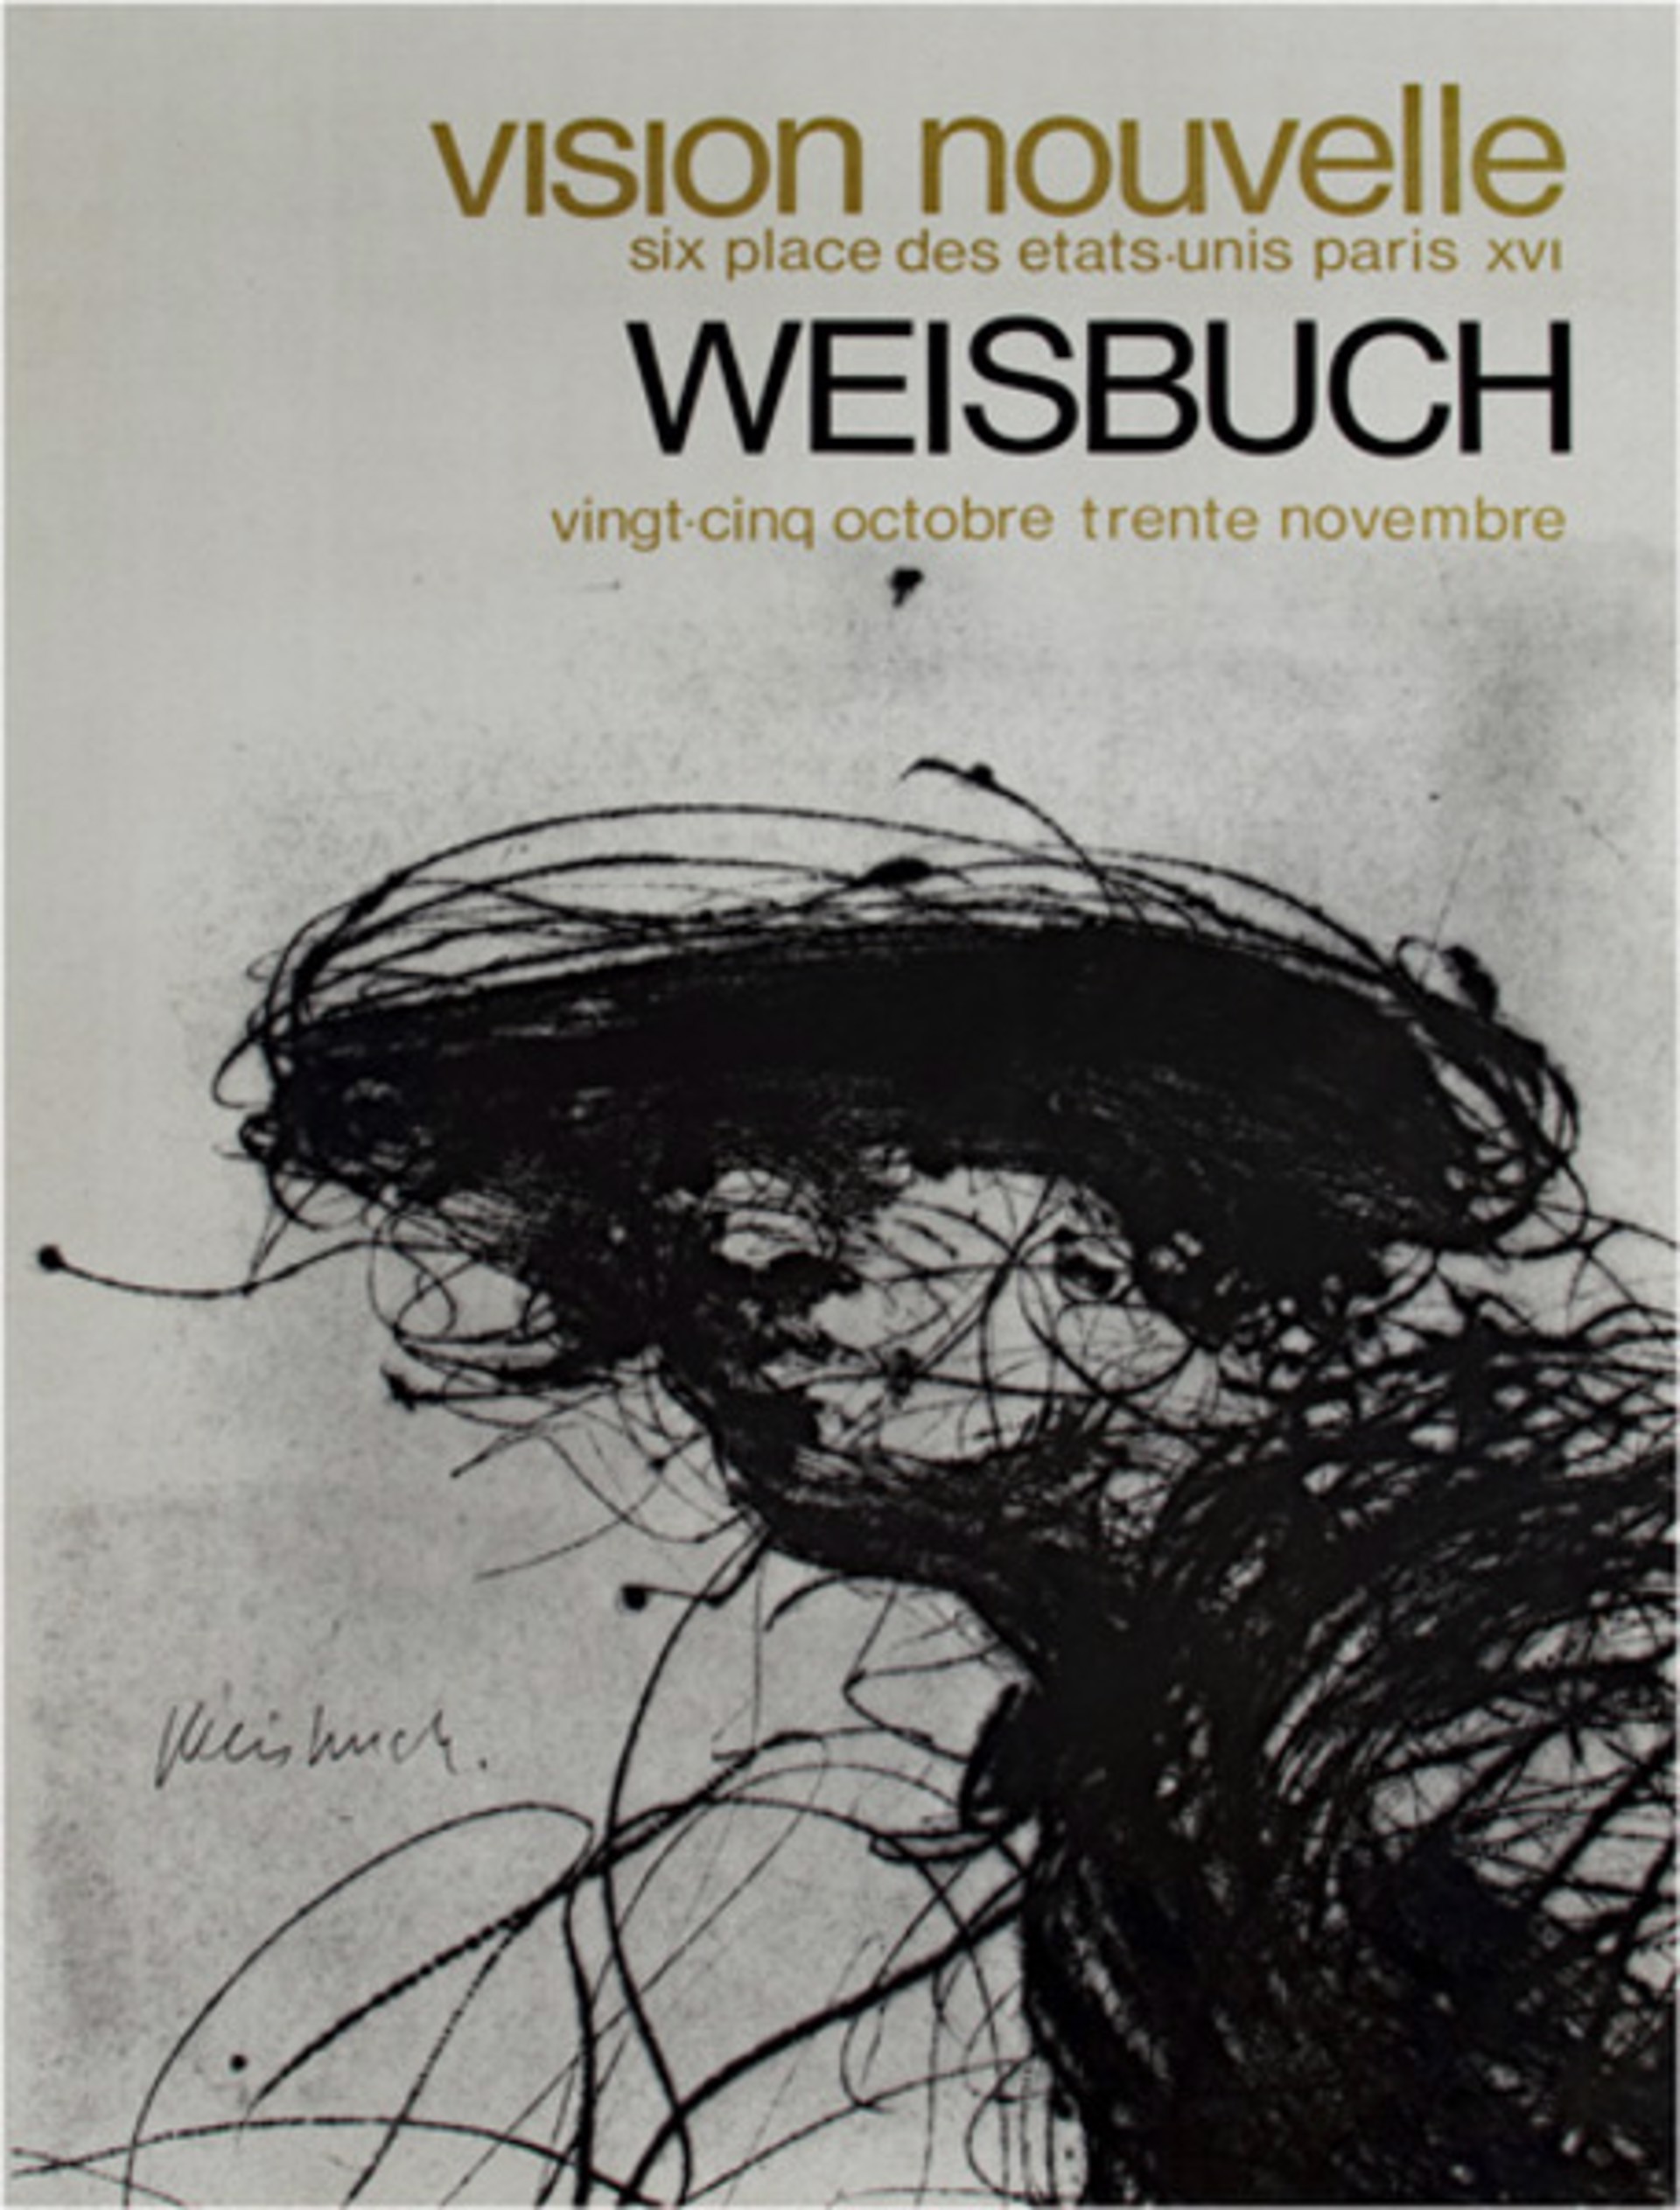 Vision Nouvelle Exhibition, Edition of about 100 by Claude Weisbuch